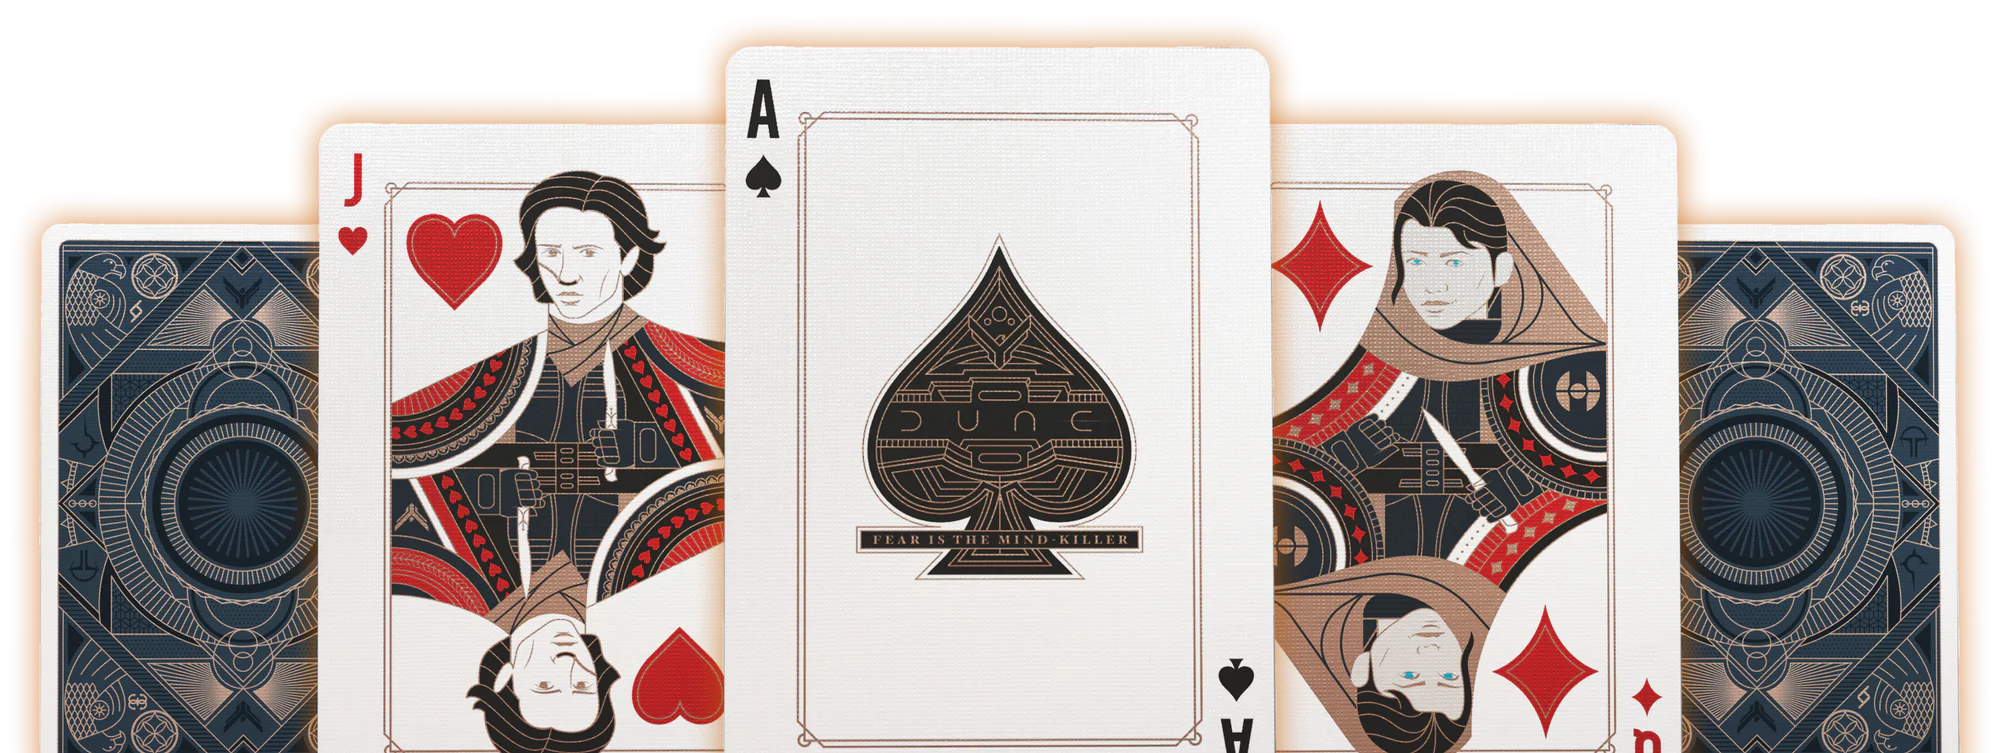 Bicycle Playing Cards: Theory 11 Dune - Bards & Cards